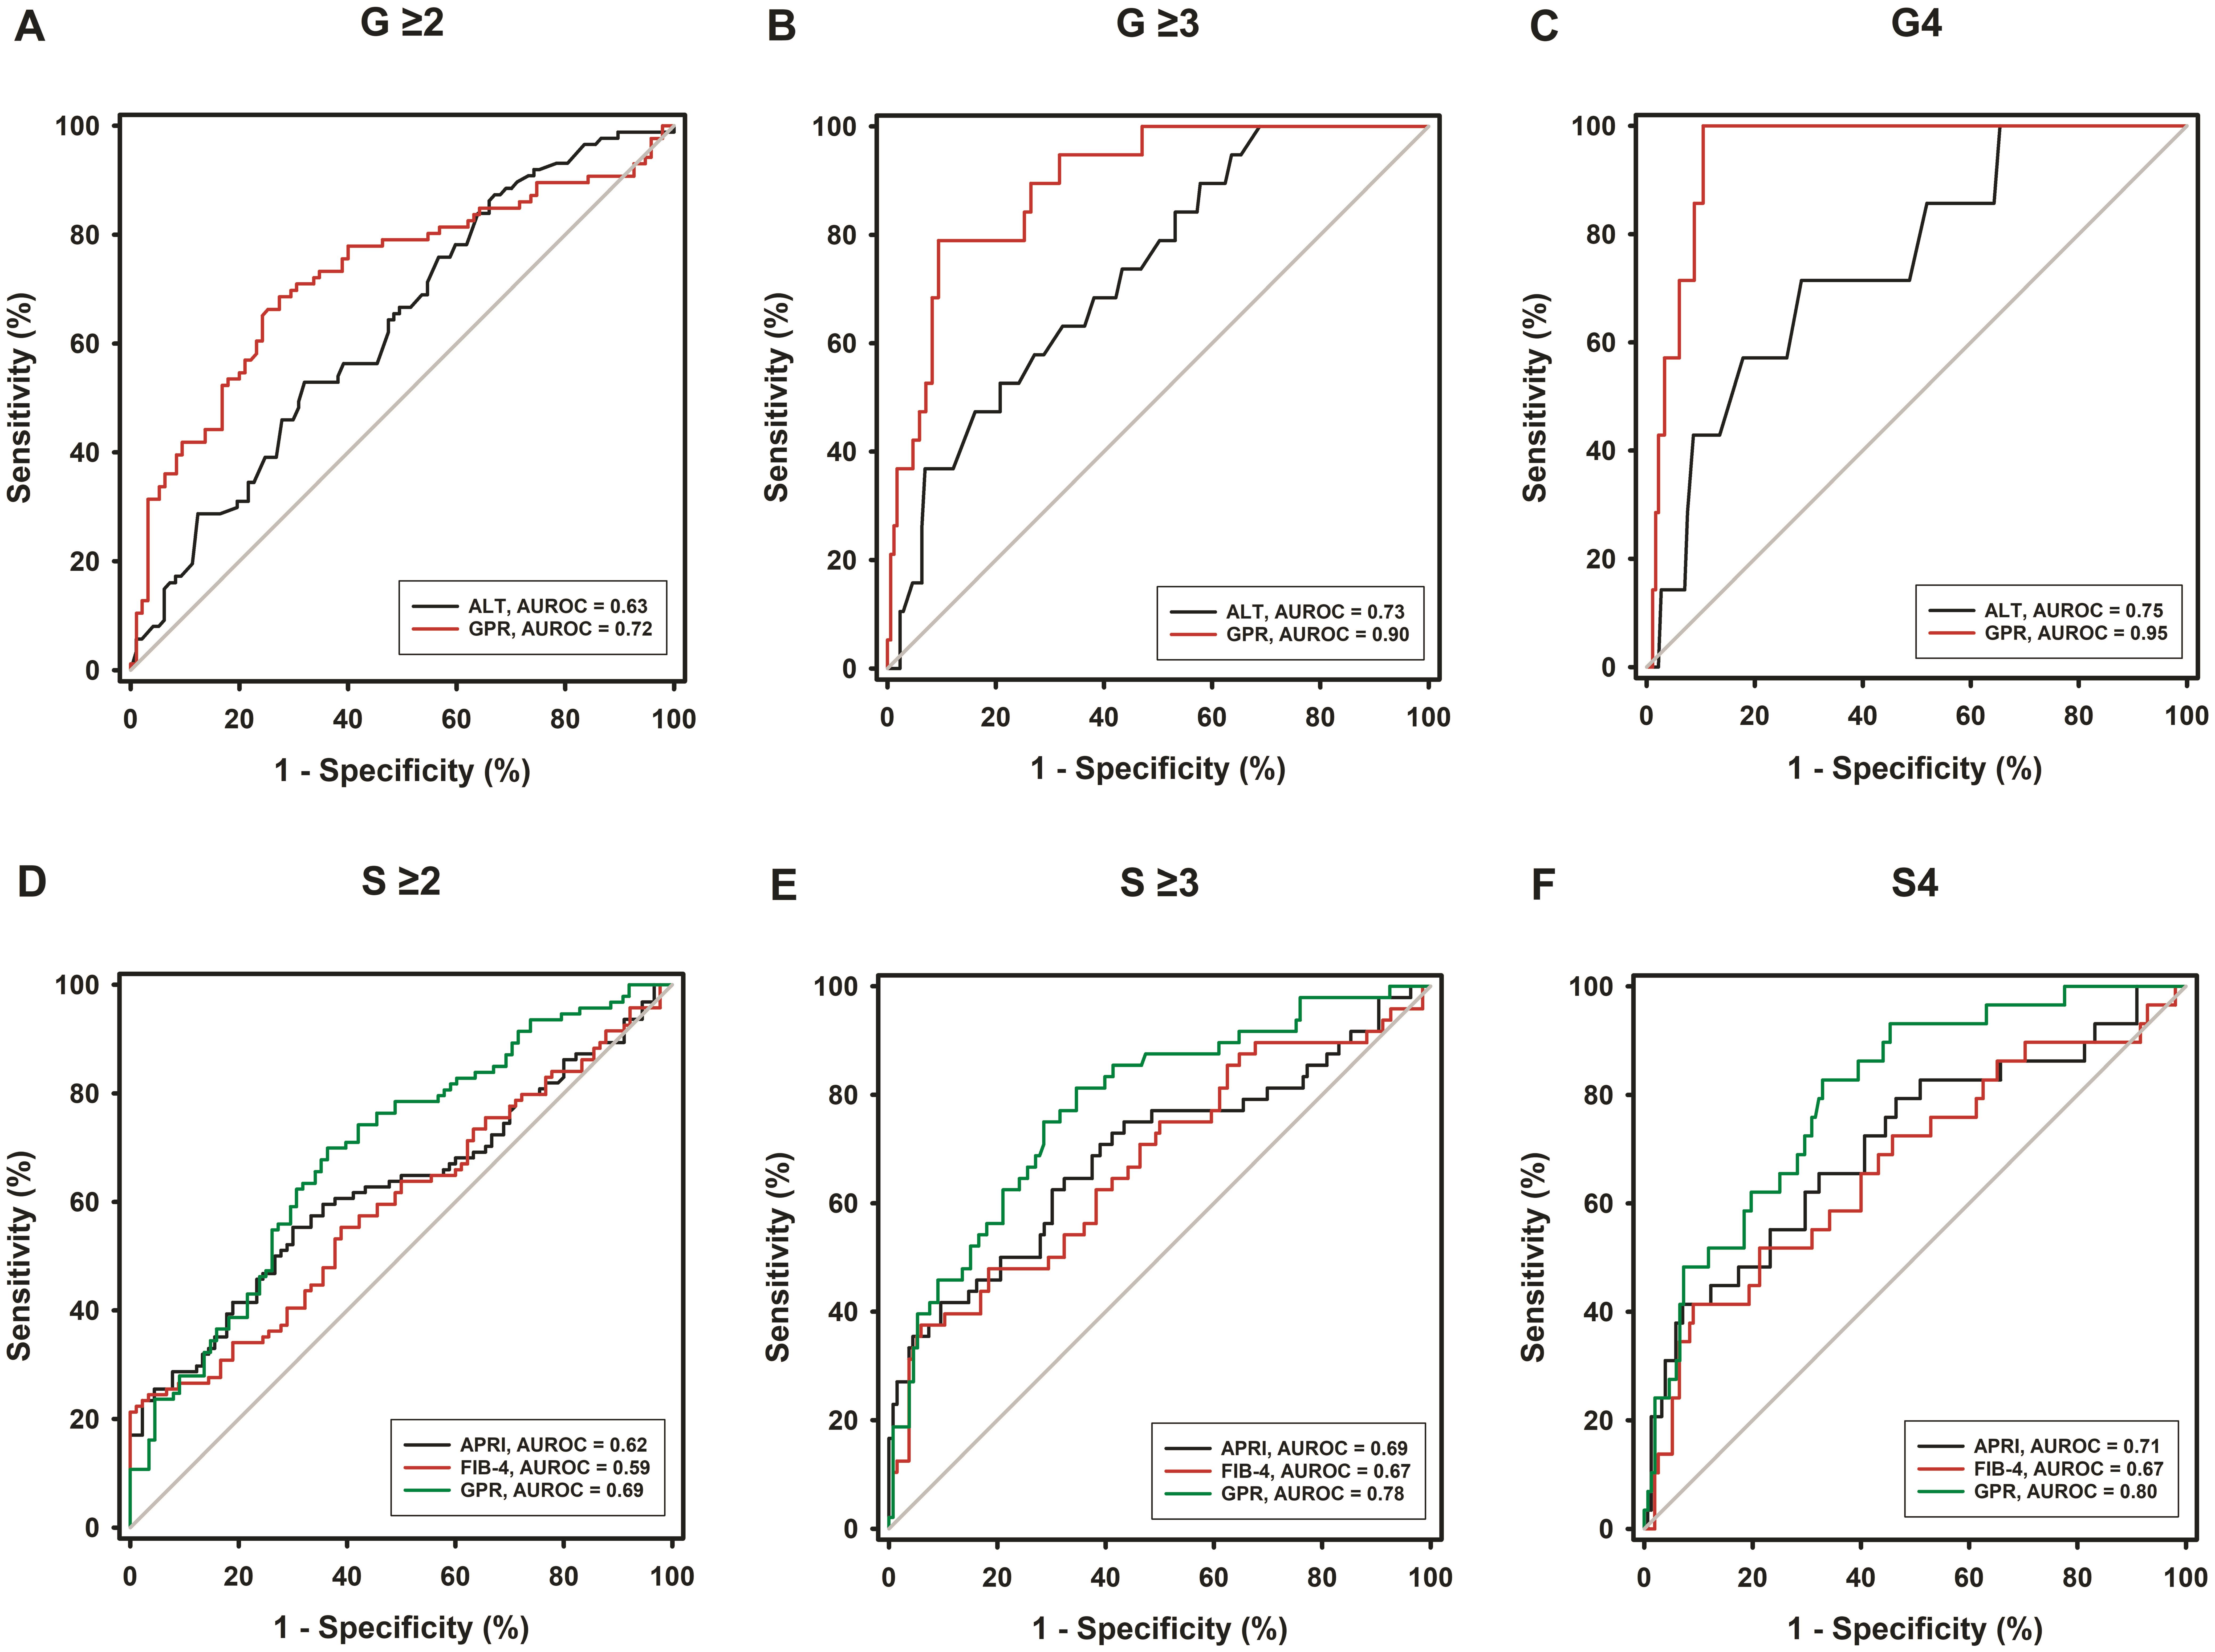 ROC curves for predicting liver inflammation and fibrosis between GPR and other indexes in the HBeAg-negative CHB patients with detectable HBV DNA and normal ALT levels.